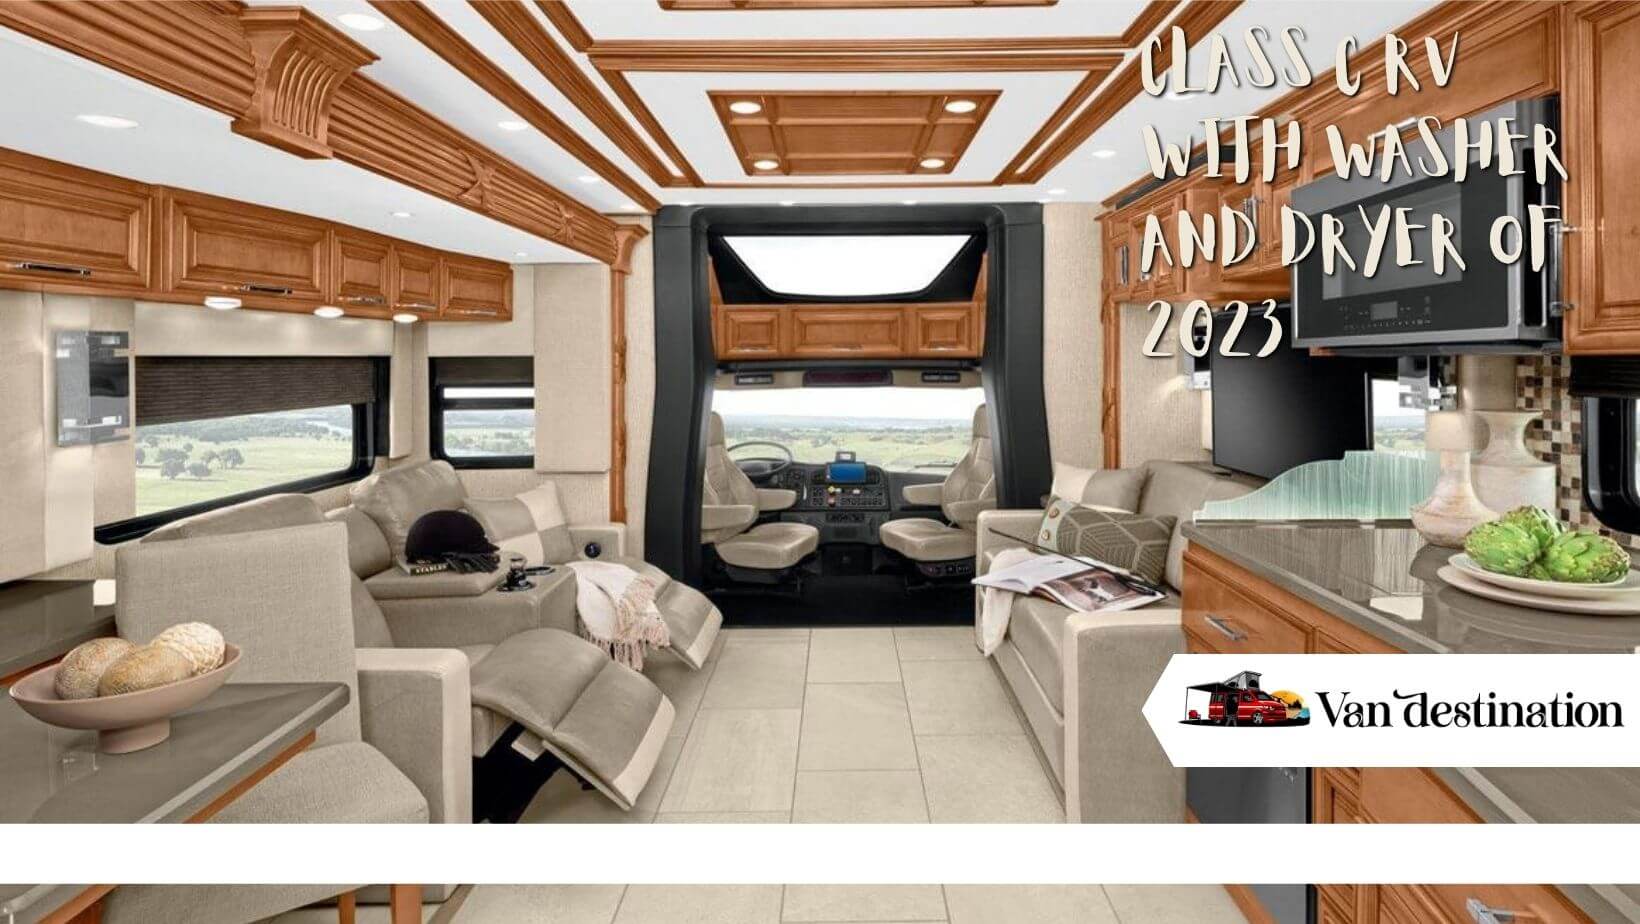 Class C RV With Washer And Dryer of 2023